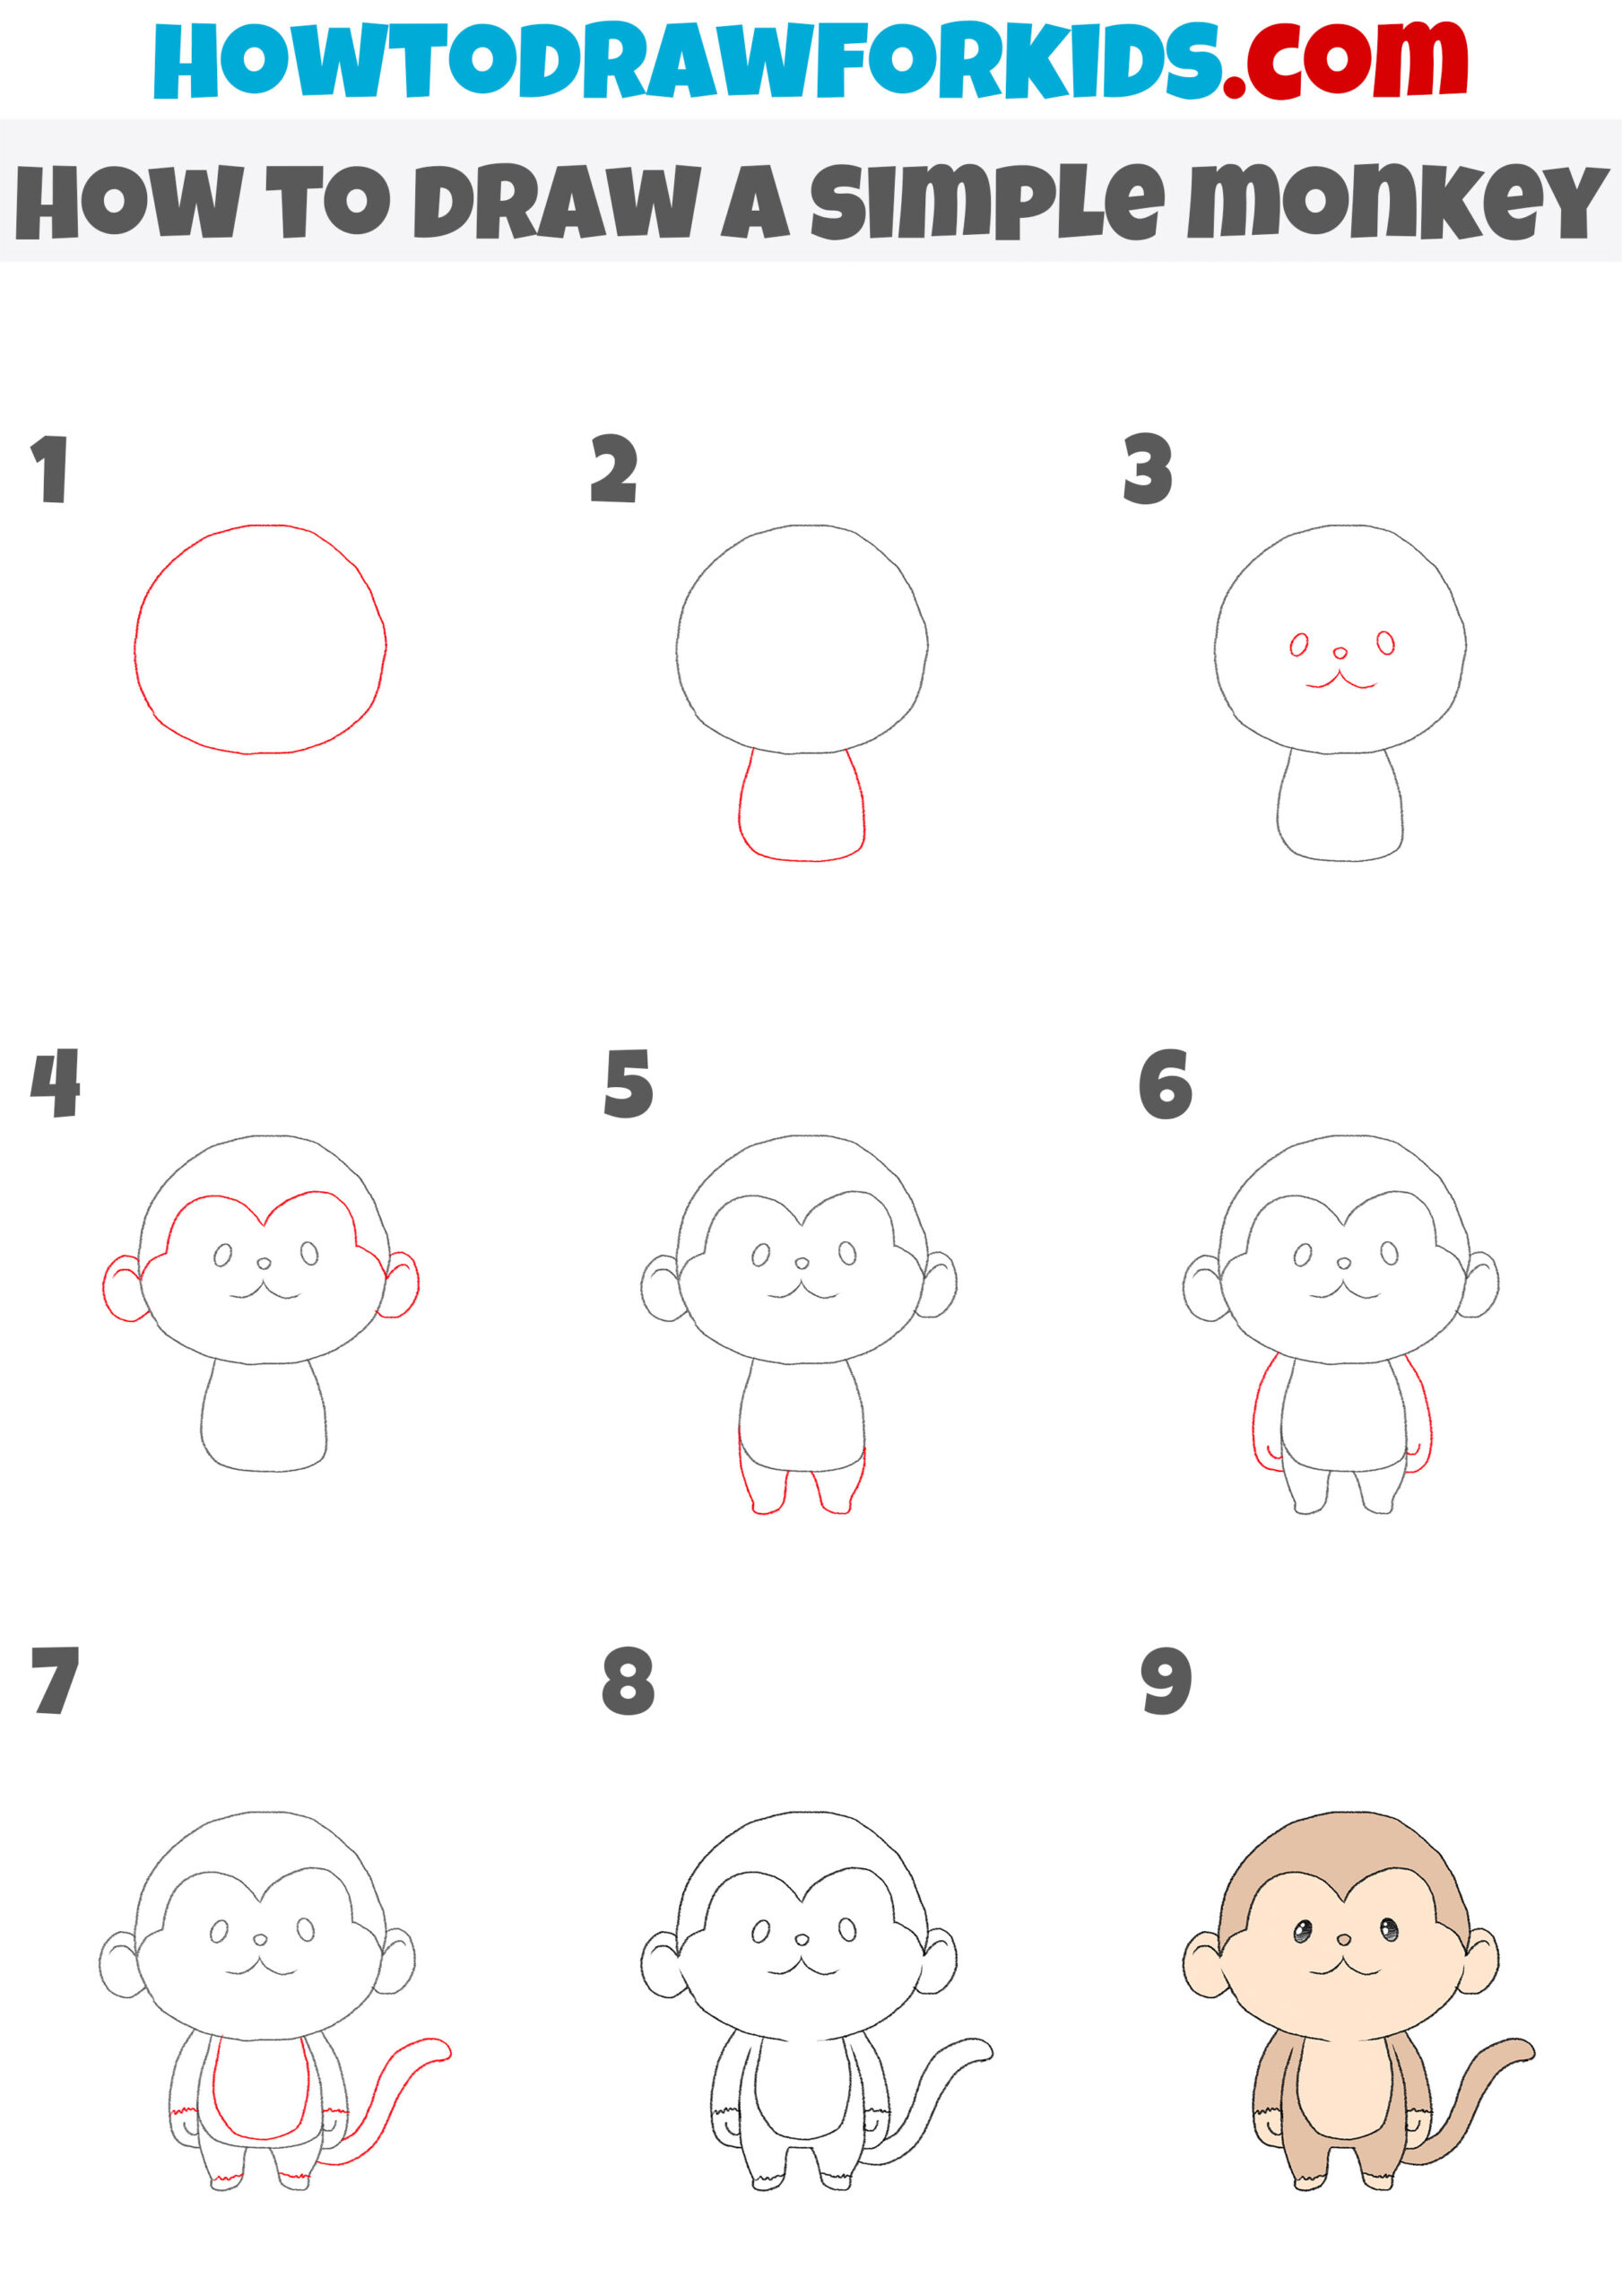 how to draw a simple monkey step by step